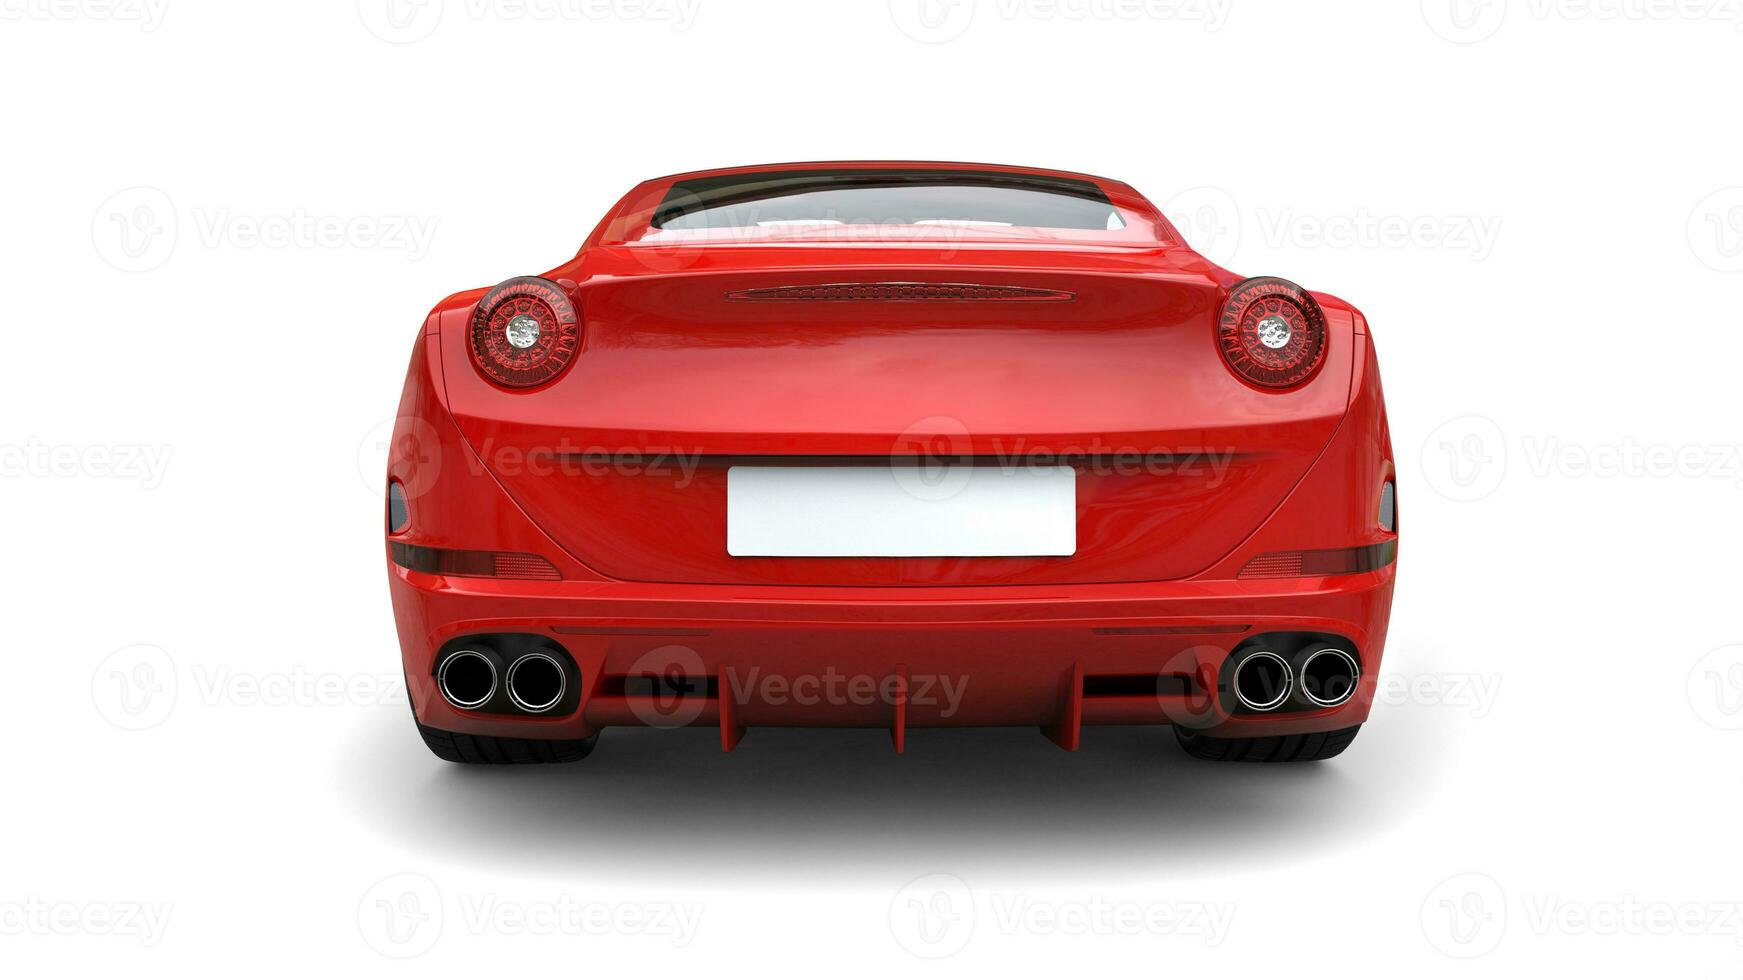 Rose red super sports car - back view photo